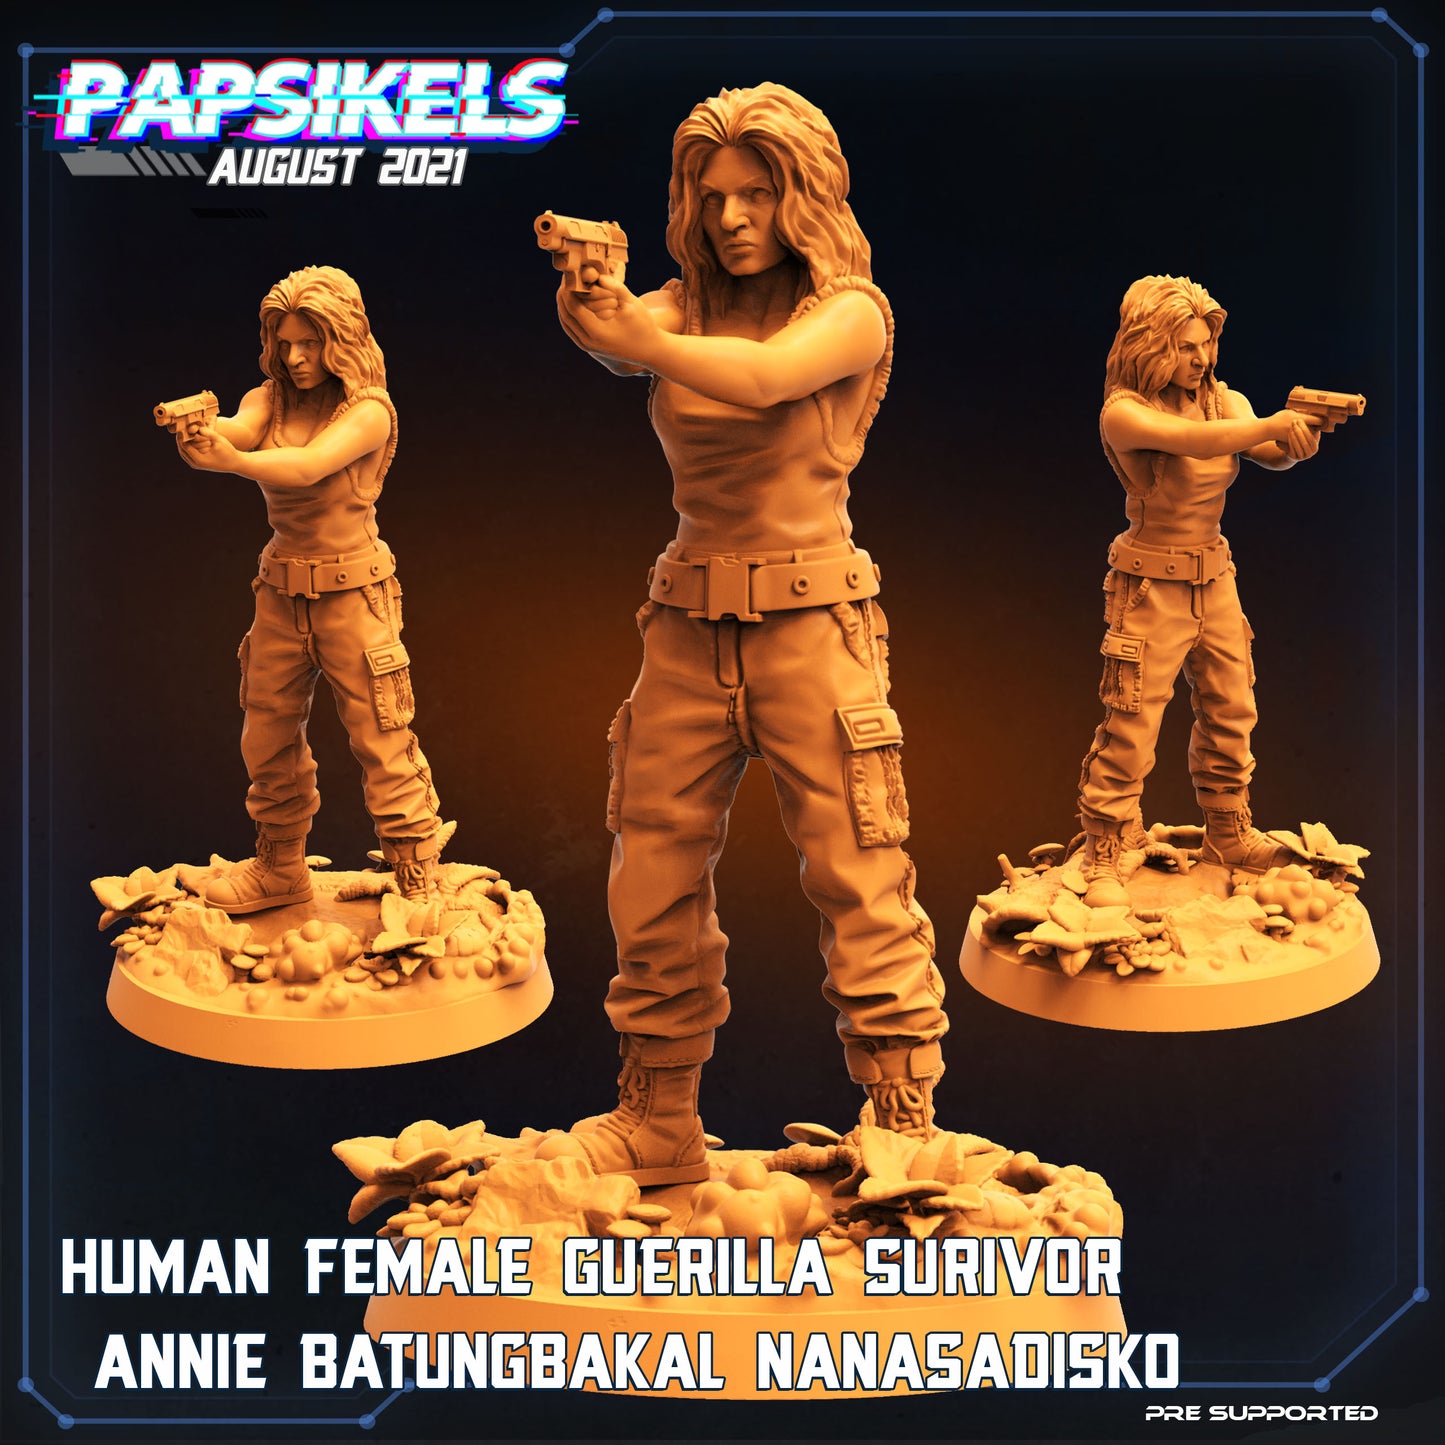 Human female Guerilla Survivor Annie Batungbakal Nanasadisko Modern Human Solder Sculpted by Papsikels, Print Available in 28mm, 32mm, 40mm original, 54mm and 75mm Statue Scale